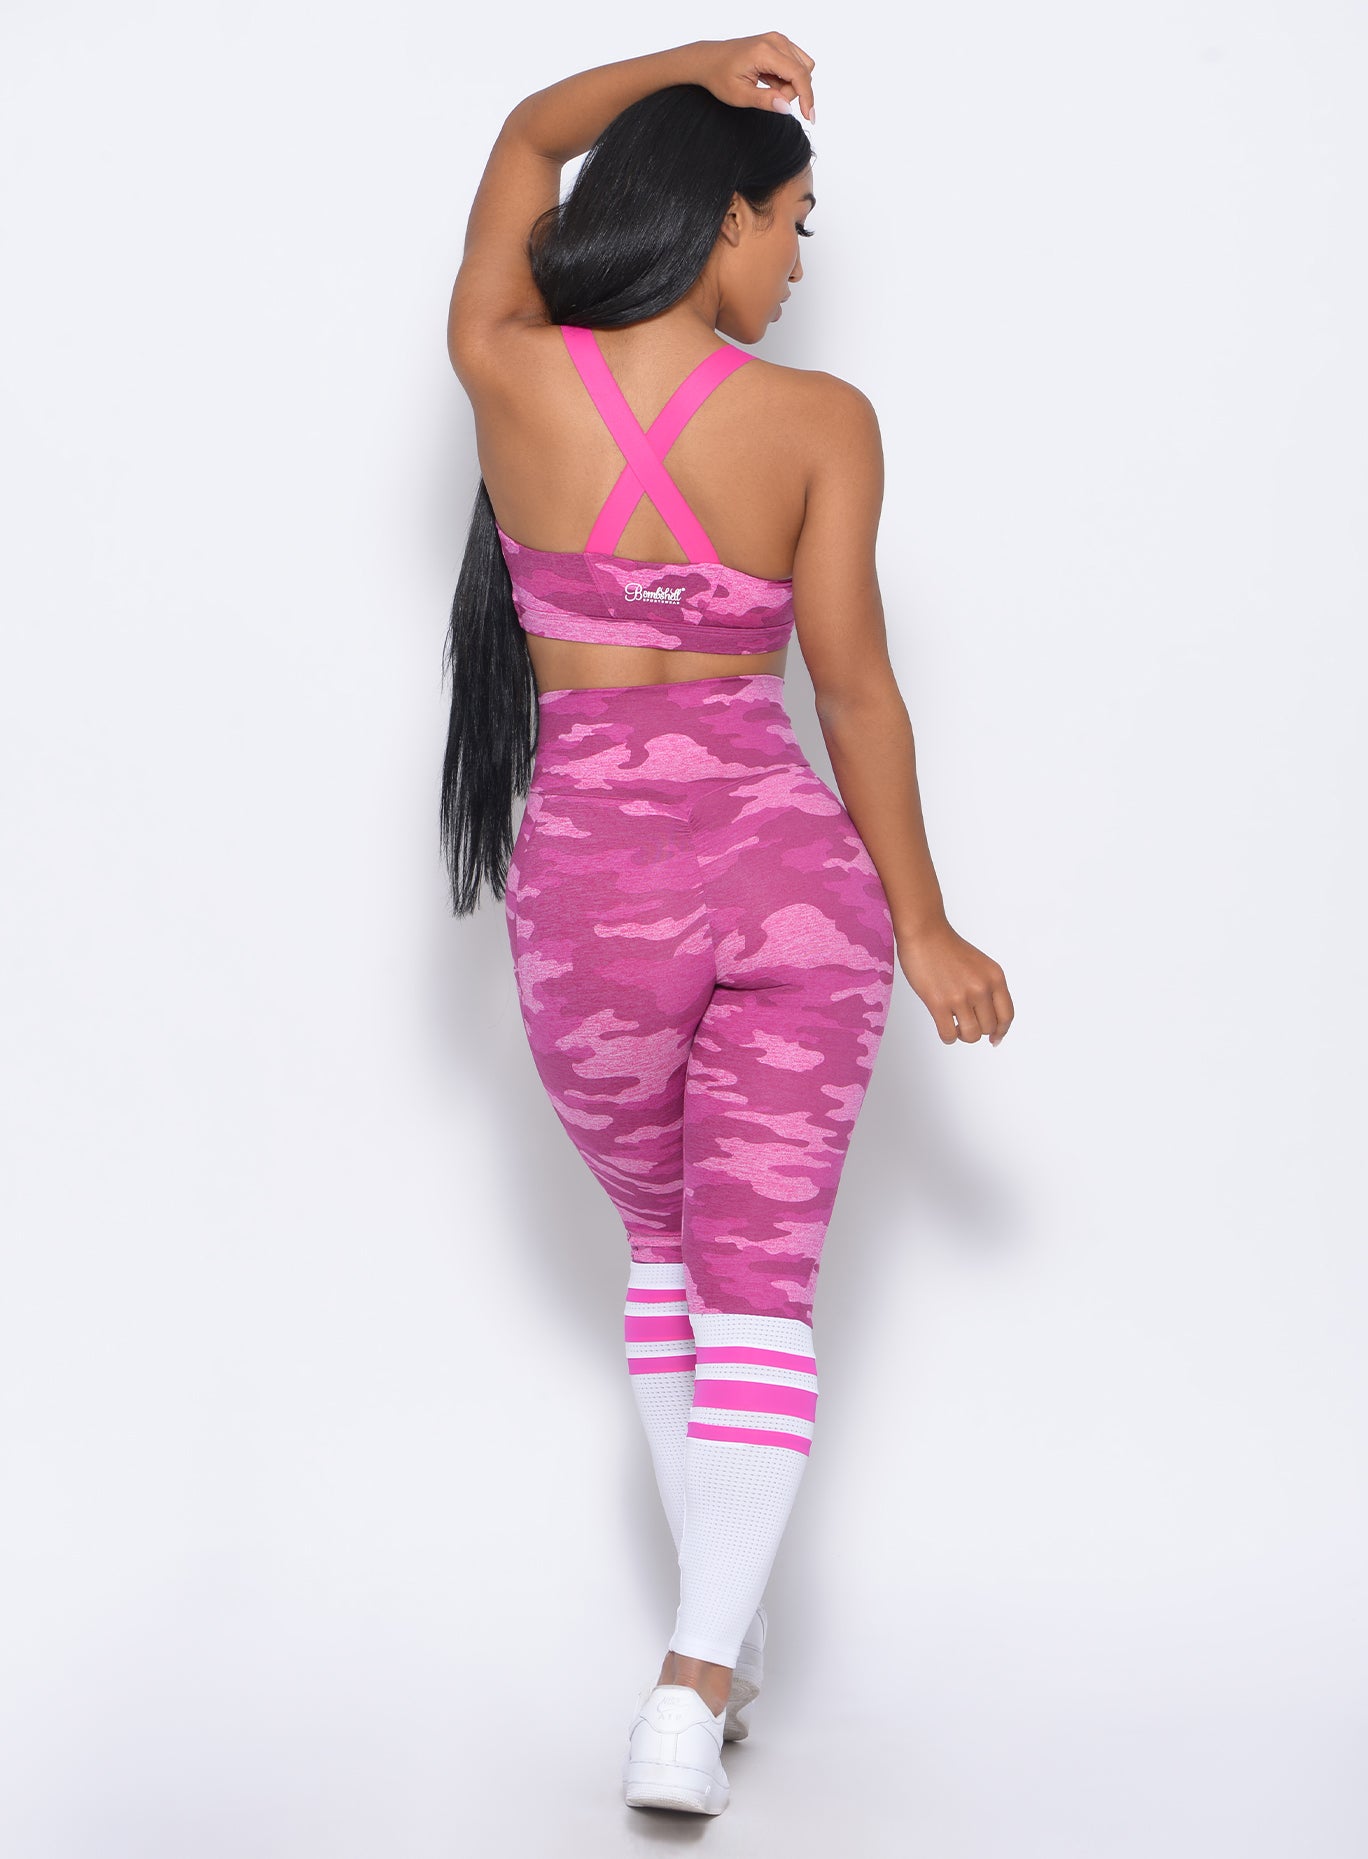 Back  view of the model in our contour sock leggings in pink camo and a matching bra